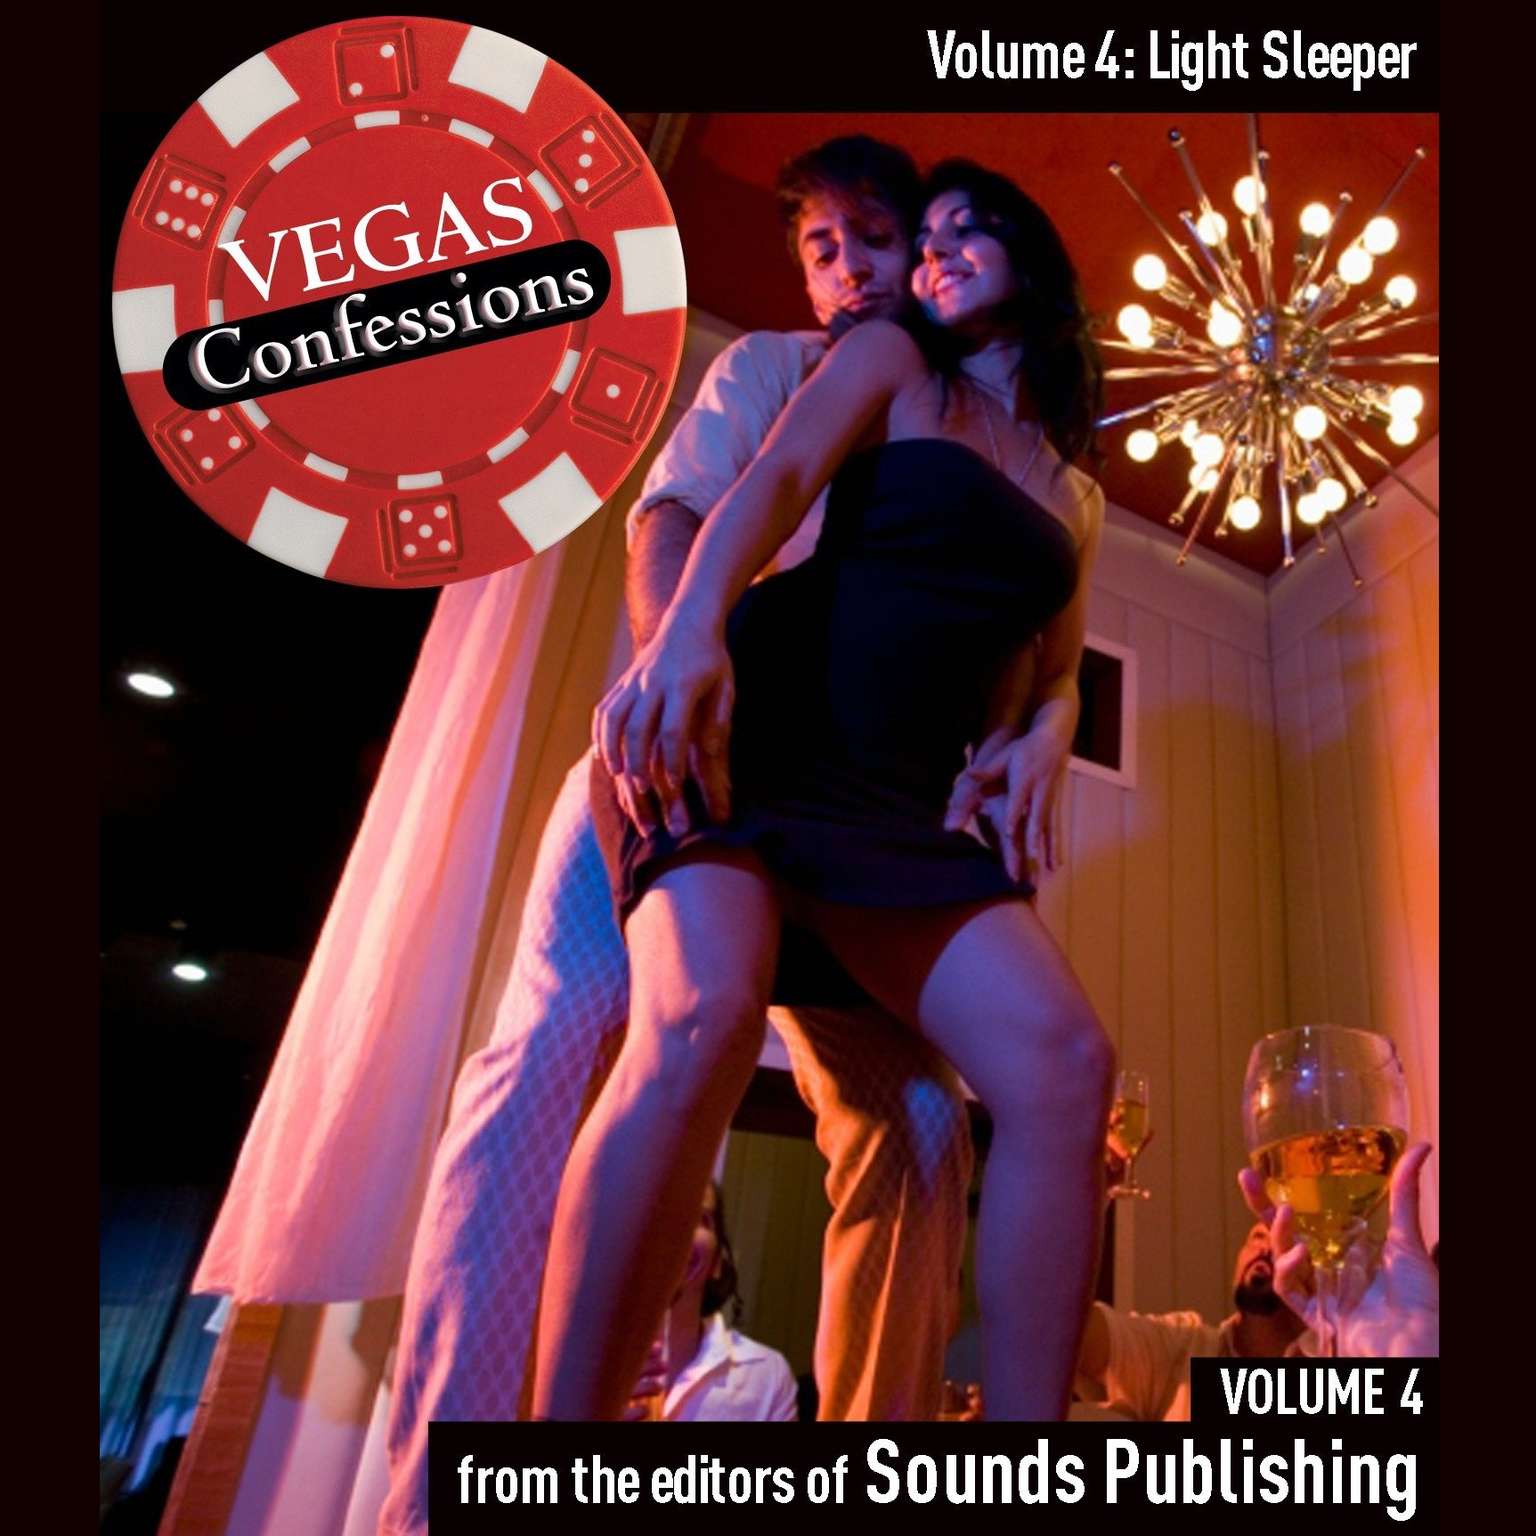 Vegas Confessions 4: Light Sleeper Audiobook, by The Editors of Sounds Publishing